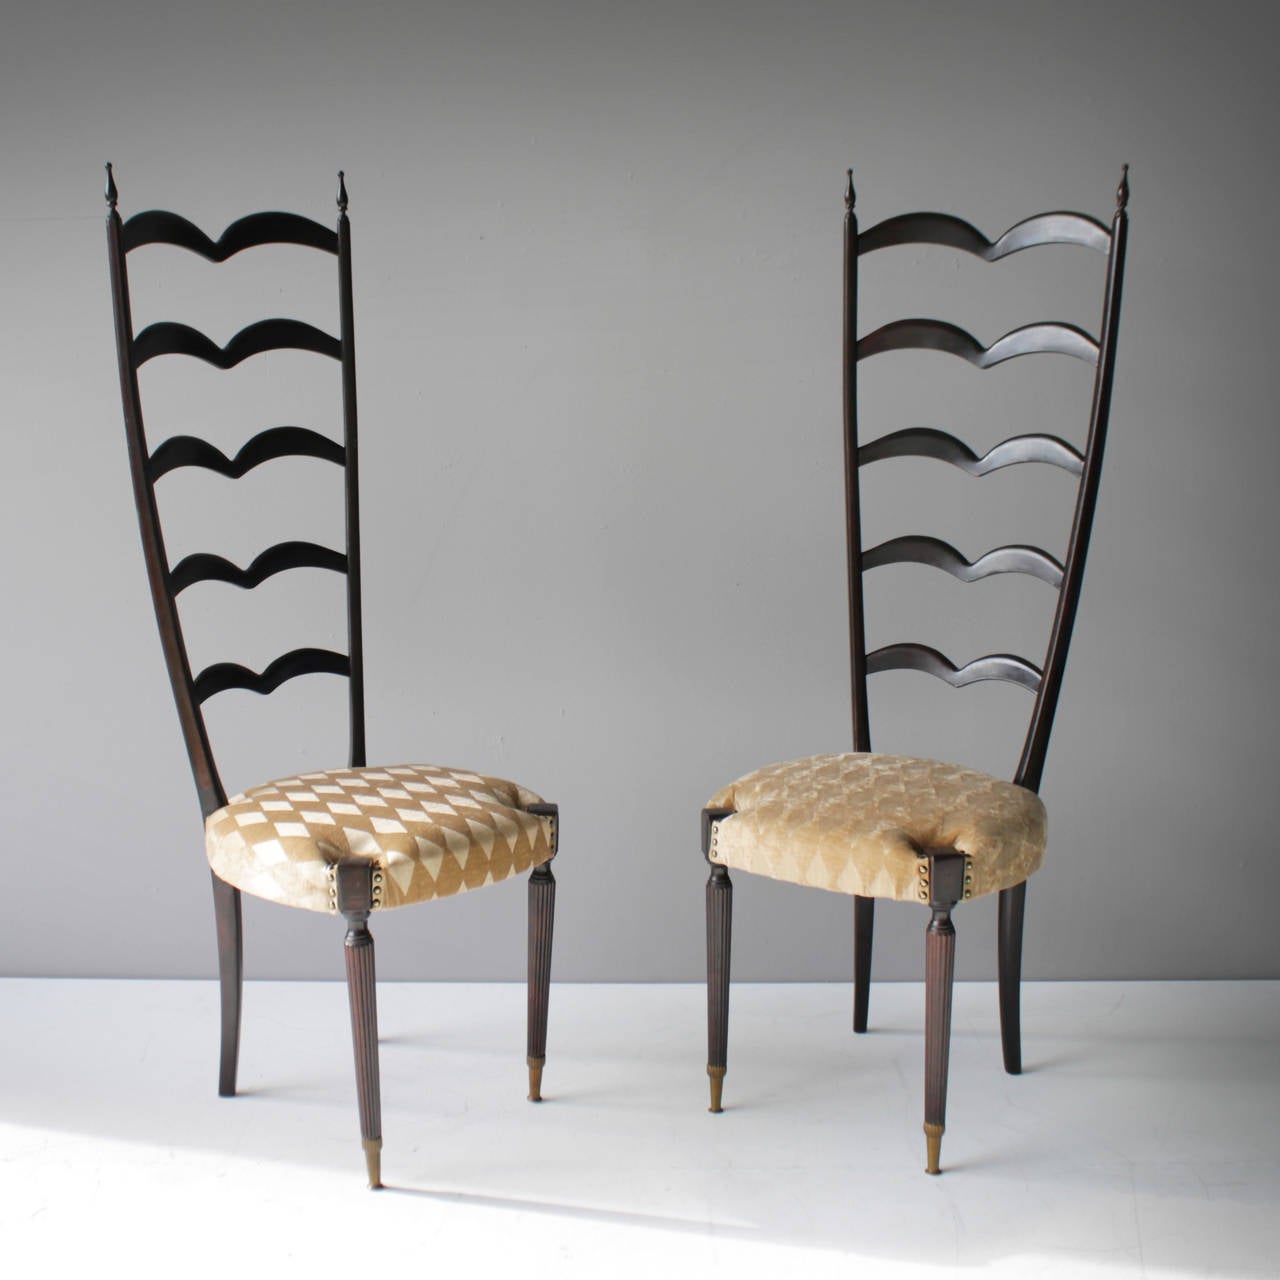 Ebonized Pair of Highly Decorative Ladder Back Chairs by Paolo Buffa